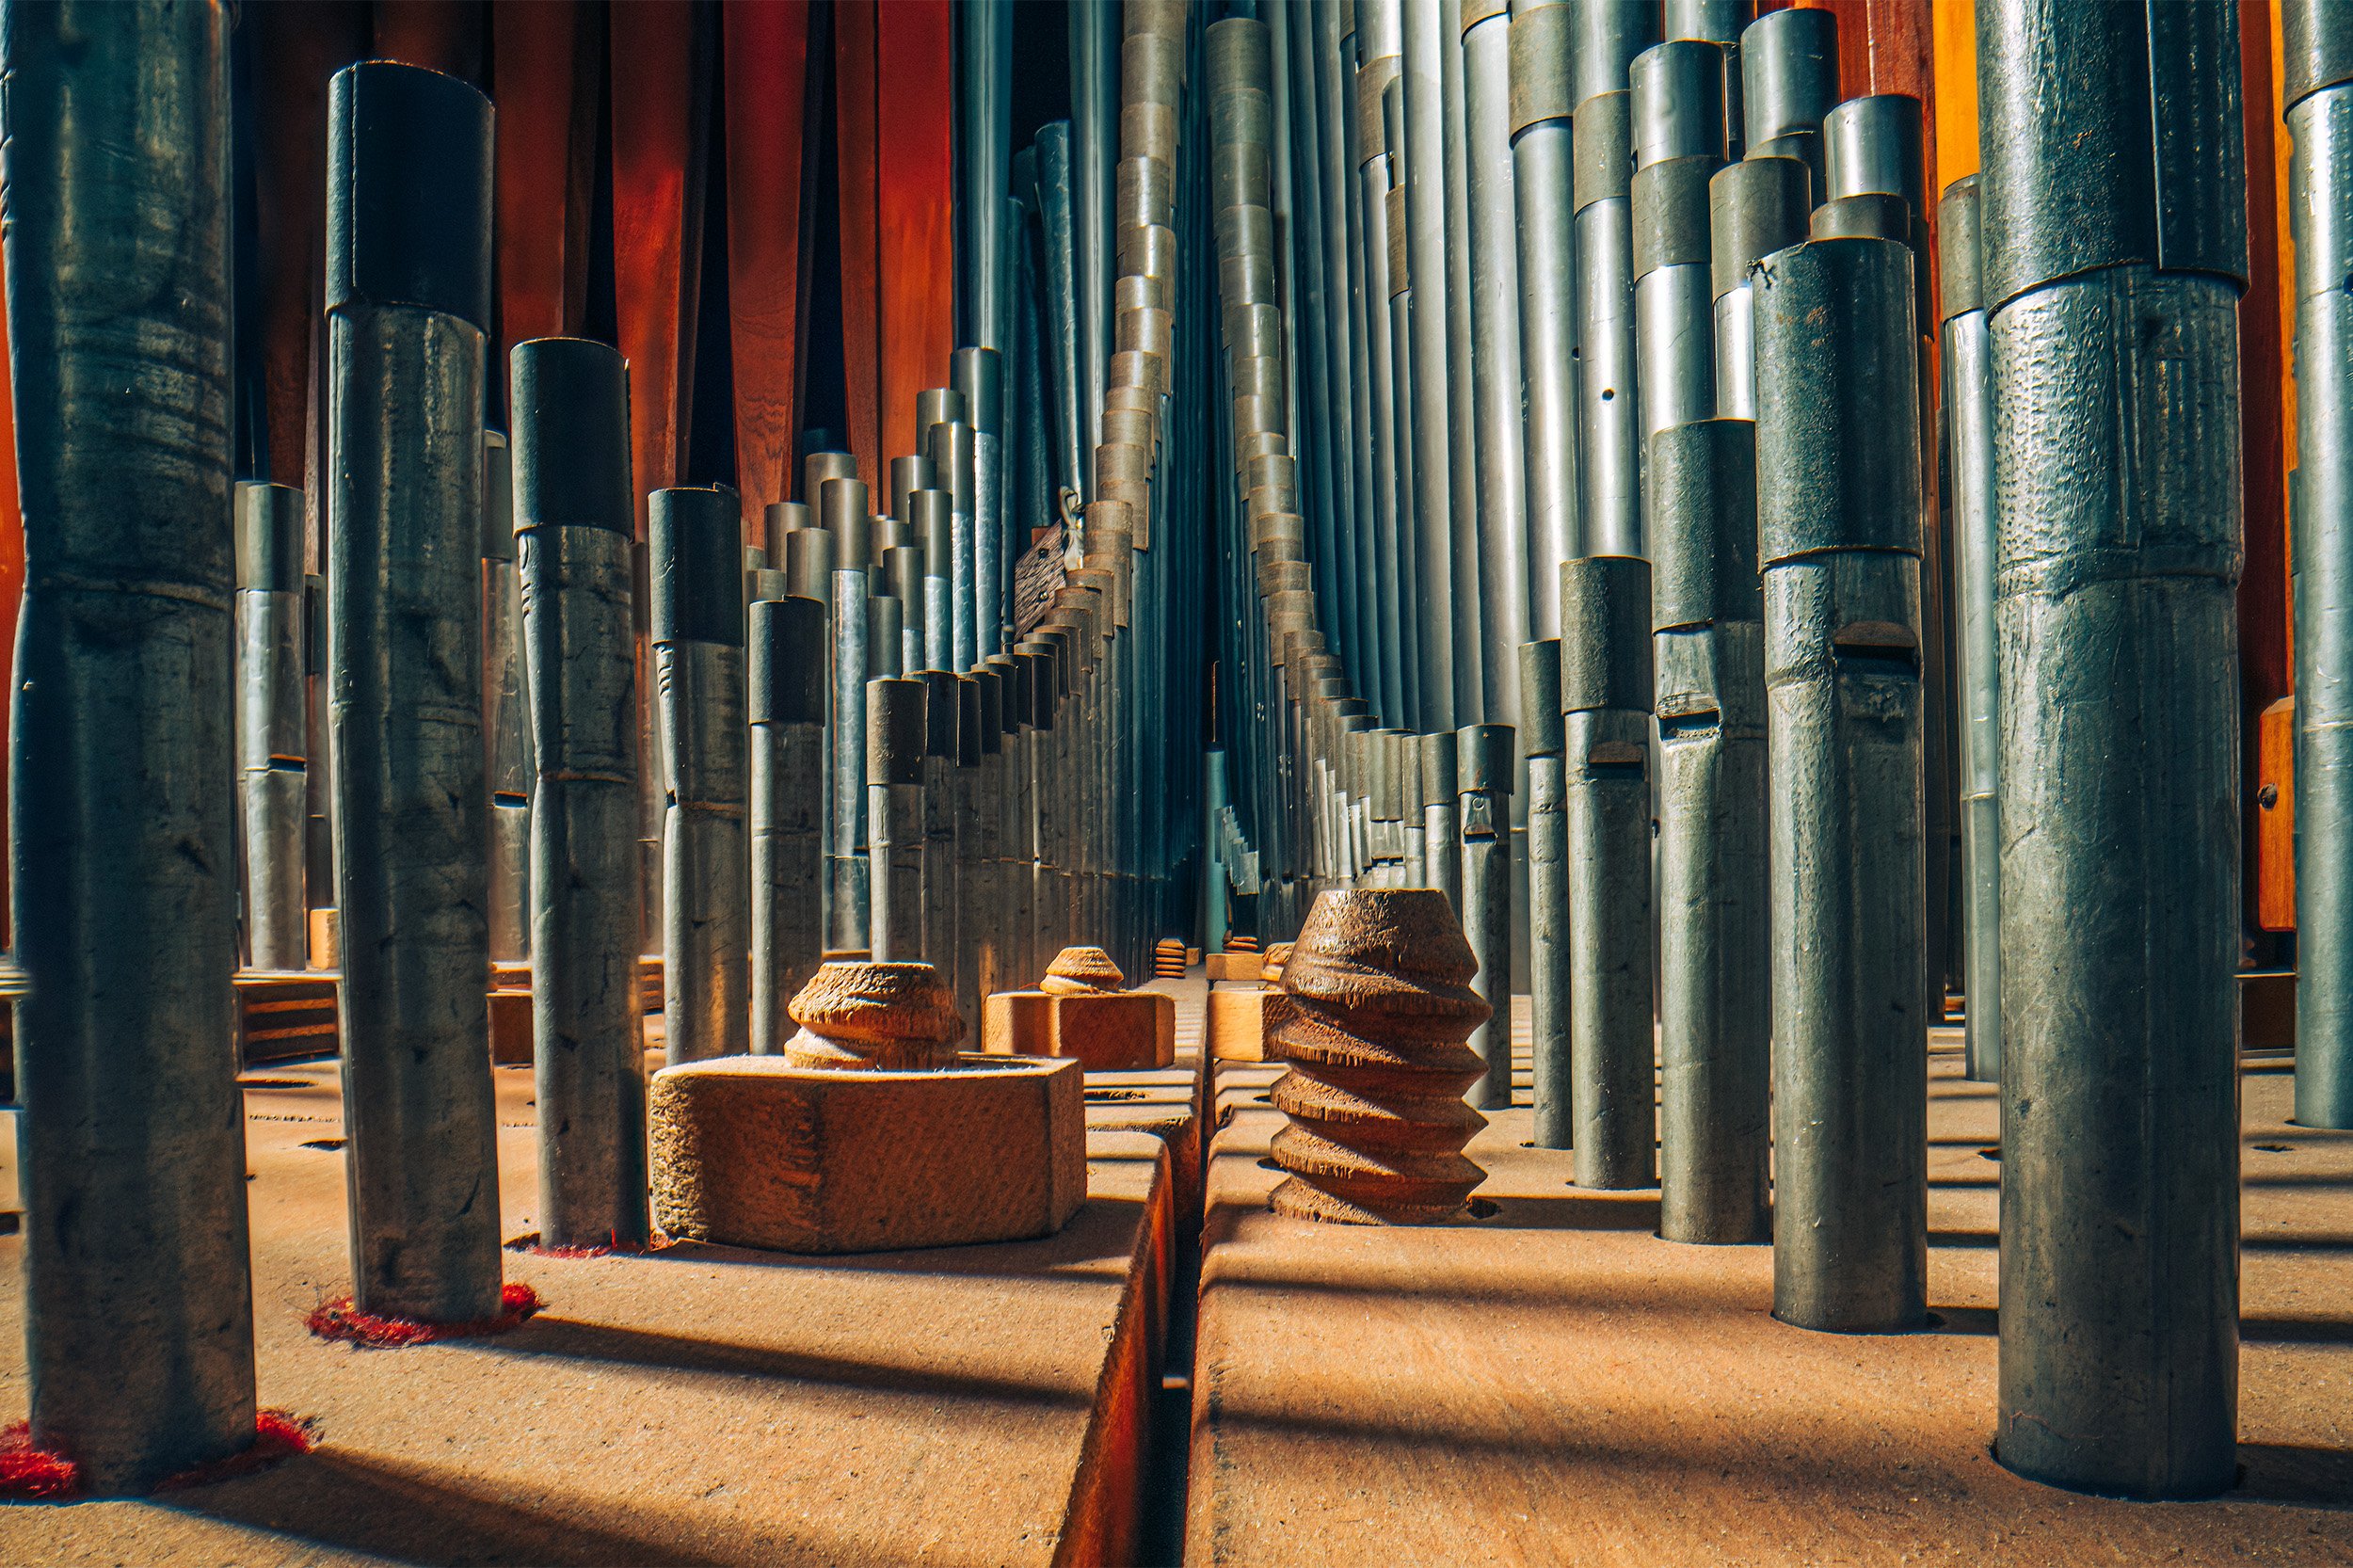 ST MARKS PIPE ORGAN, PART 2